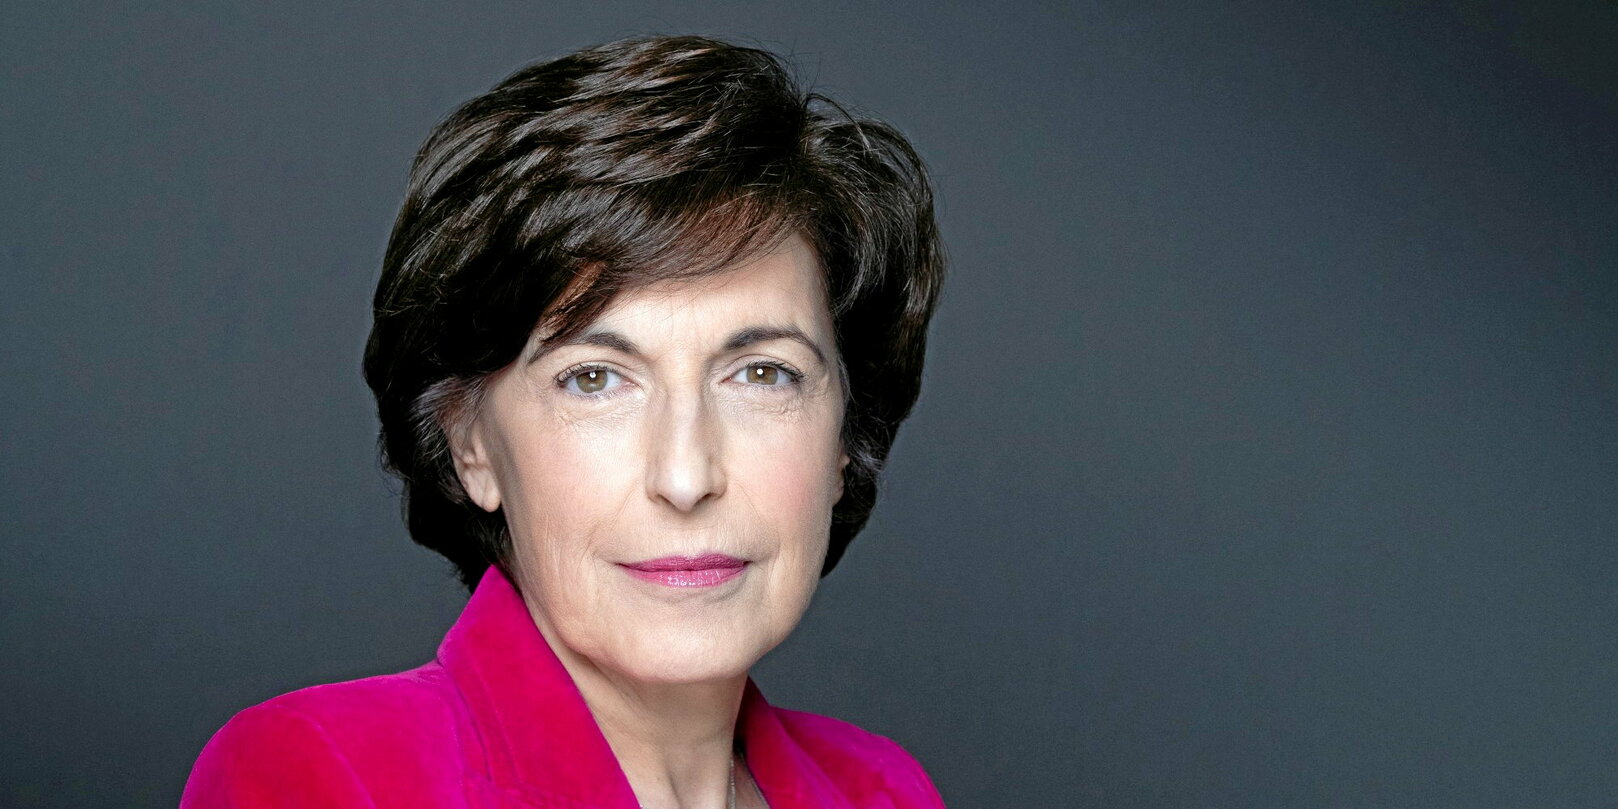 TF1 supports Ruth Elkrief, after incriminating invectives from Mélenchon